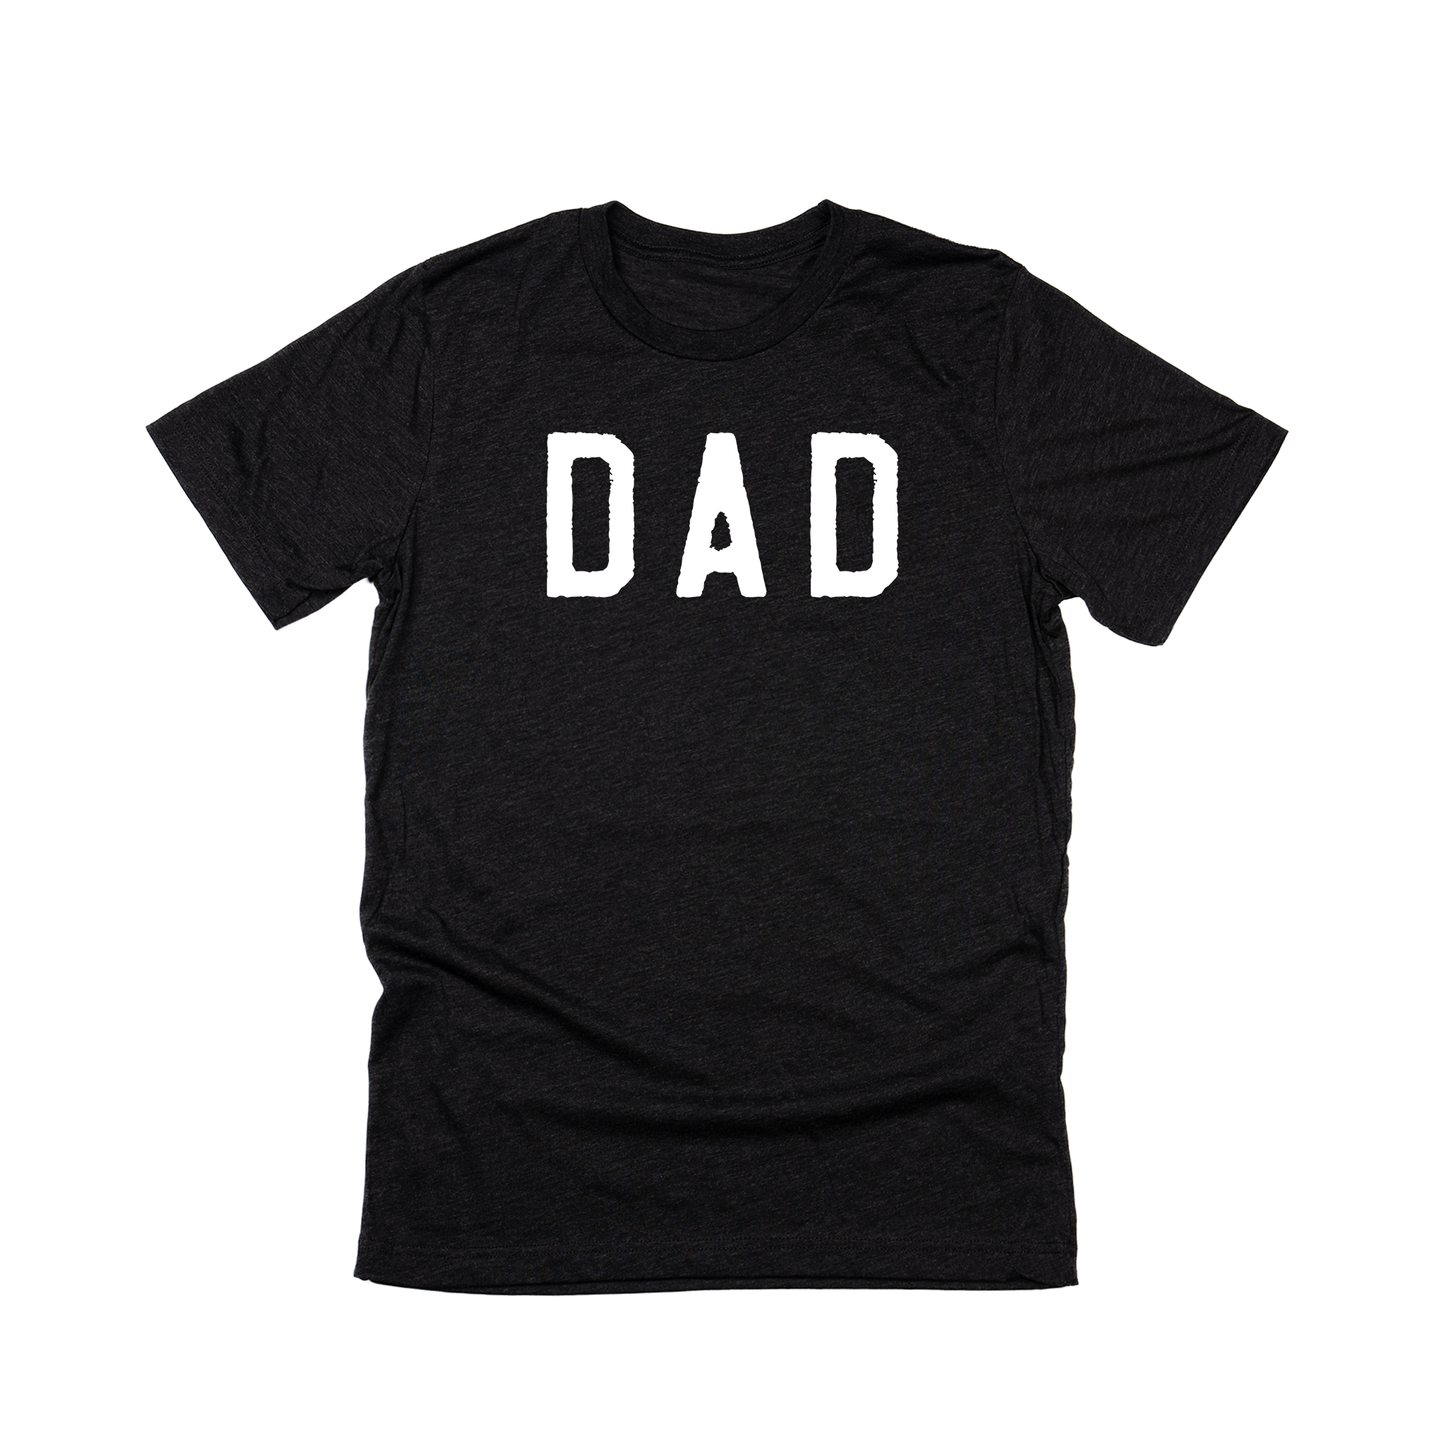 Dad (Rough, White) - Tee (Charcoal Black)